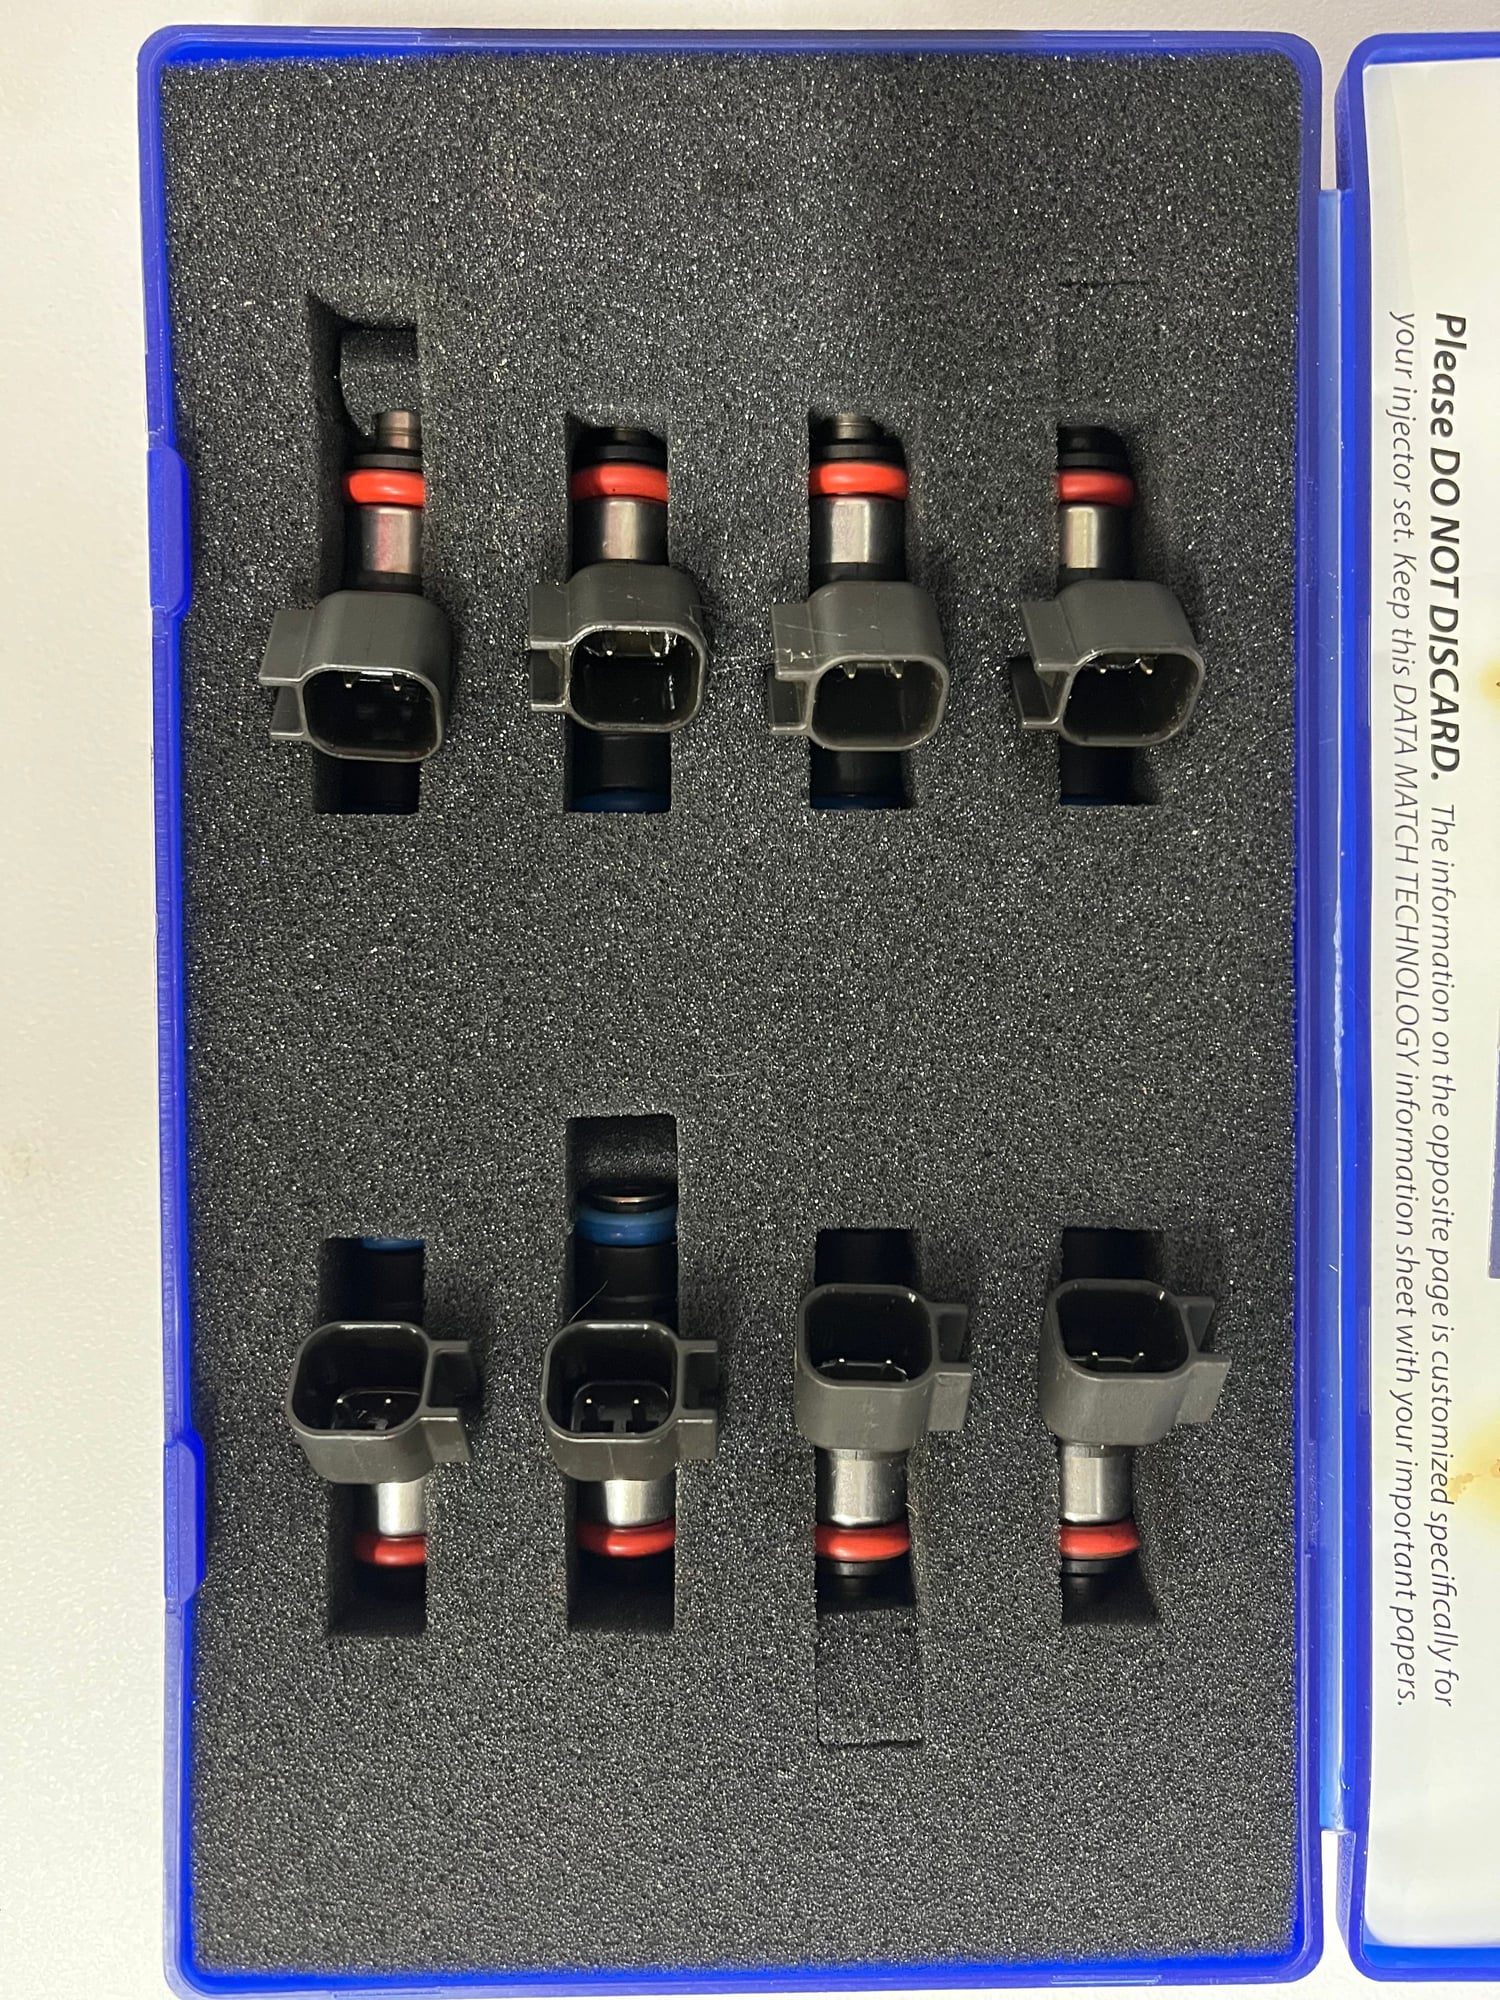 Miscellaneous - LS7 Stock Injectors 50k miles - Used - 0  All Models - Harlingen, TX 78552, United States